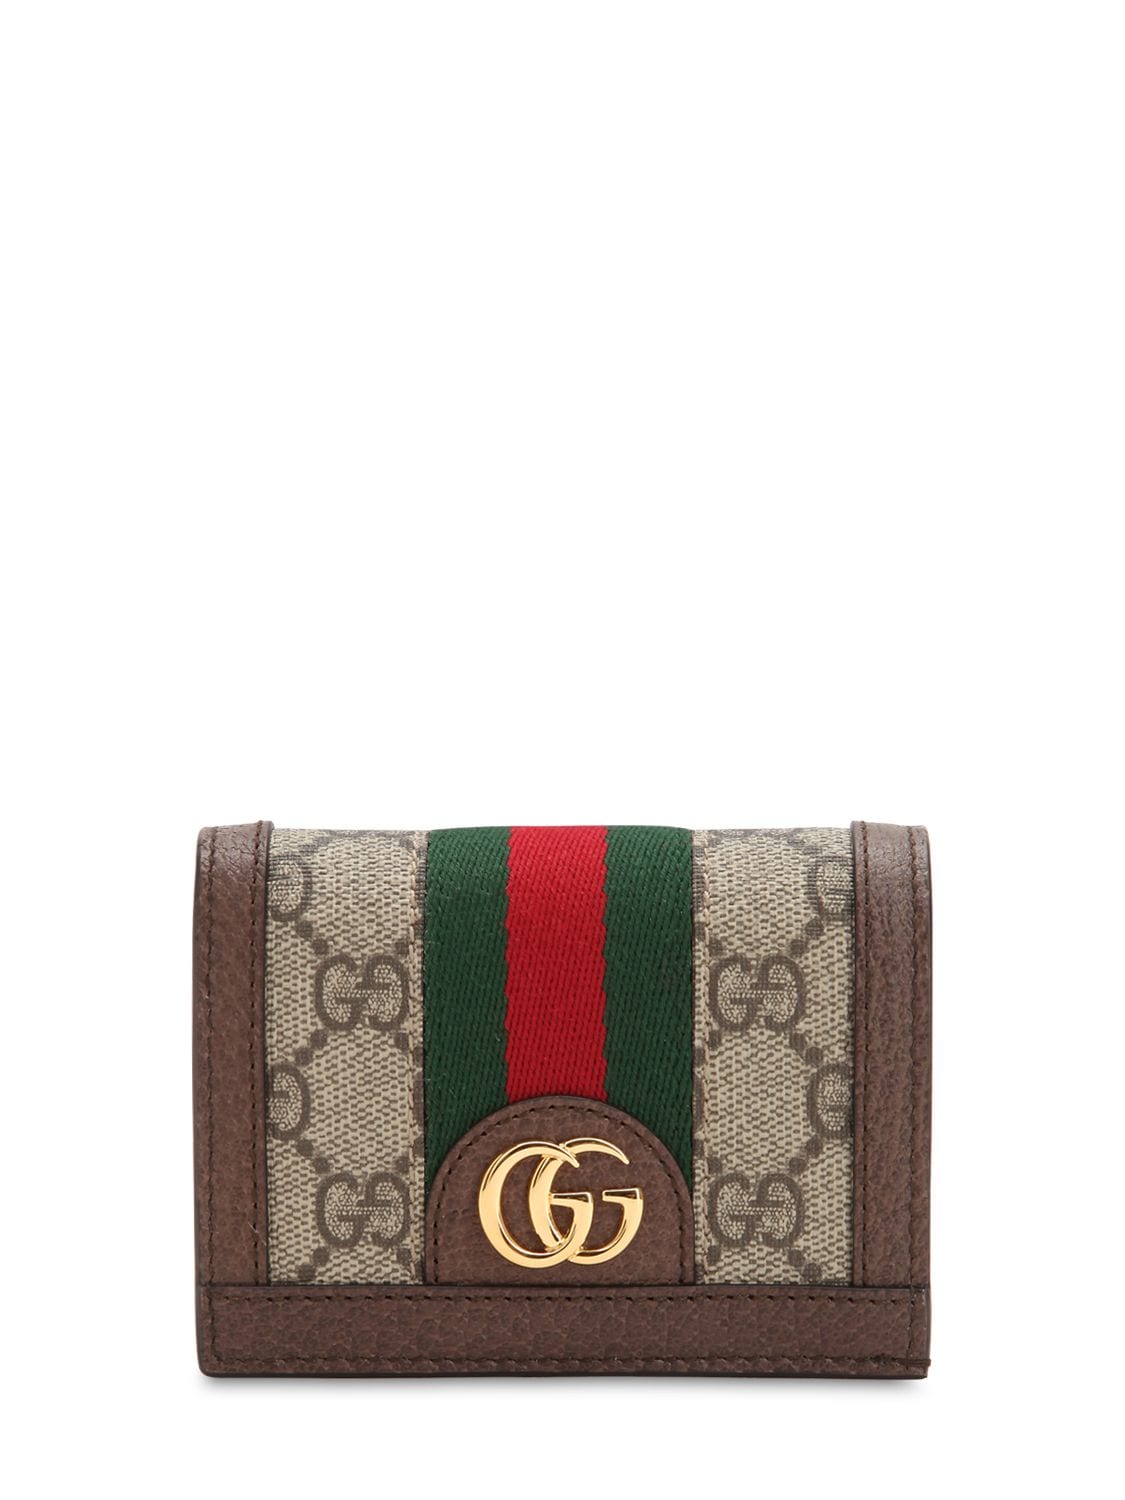 Gucci Ophidia Gg Supreme Compact Wallet In Brown